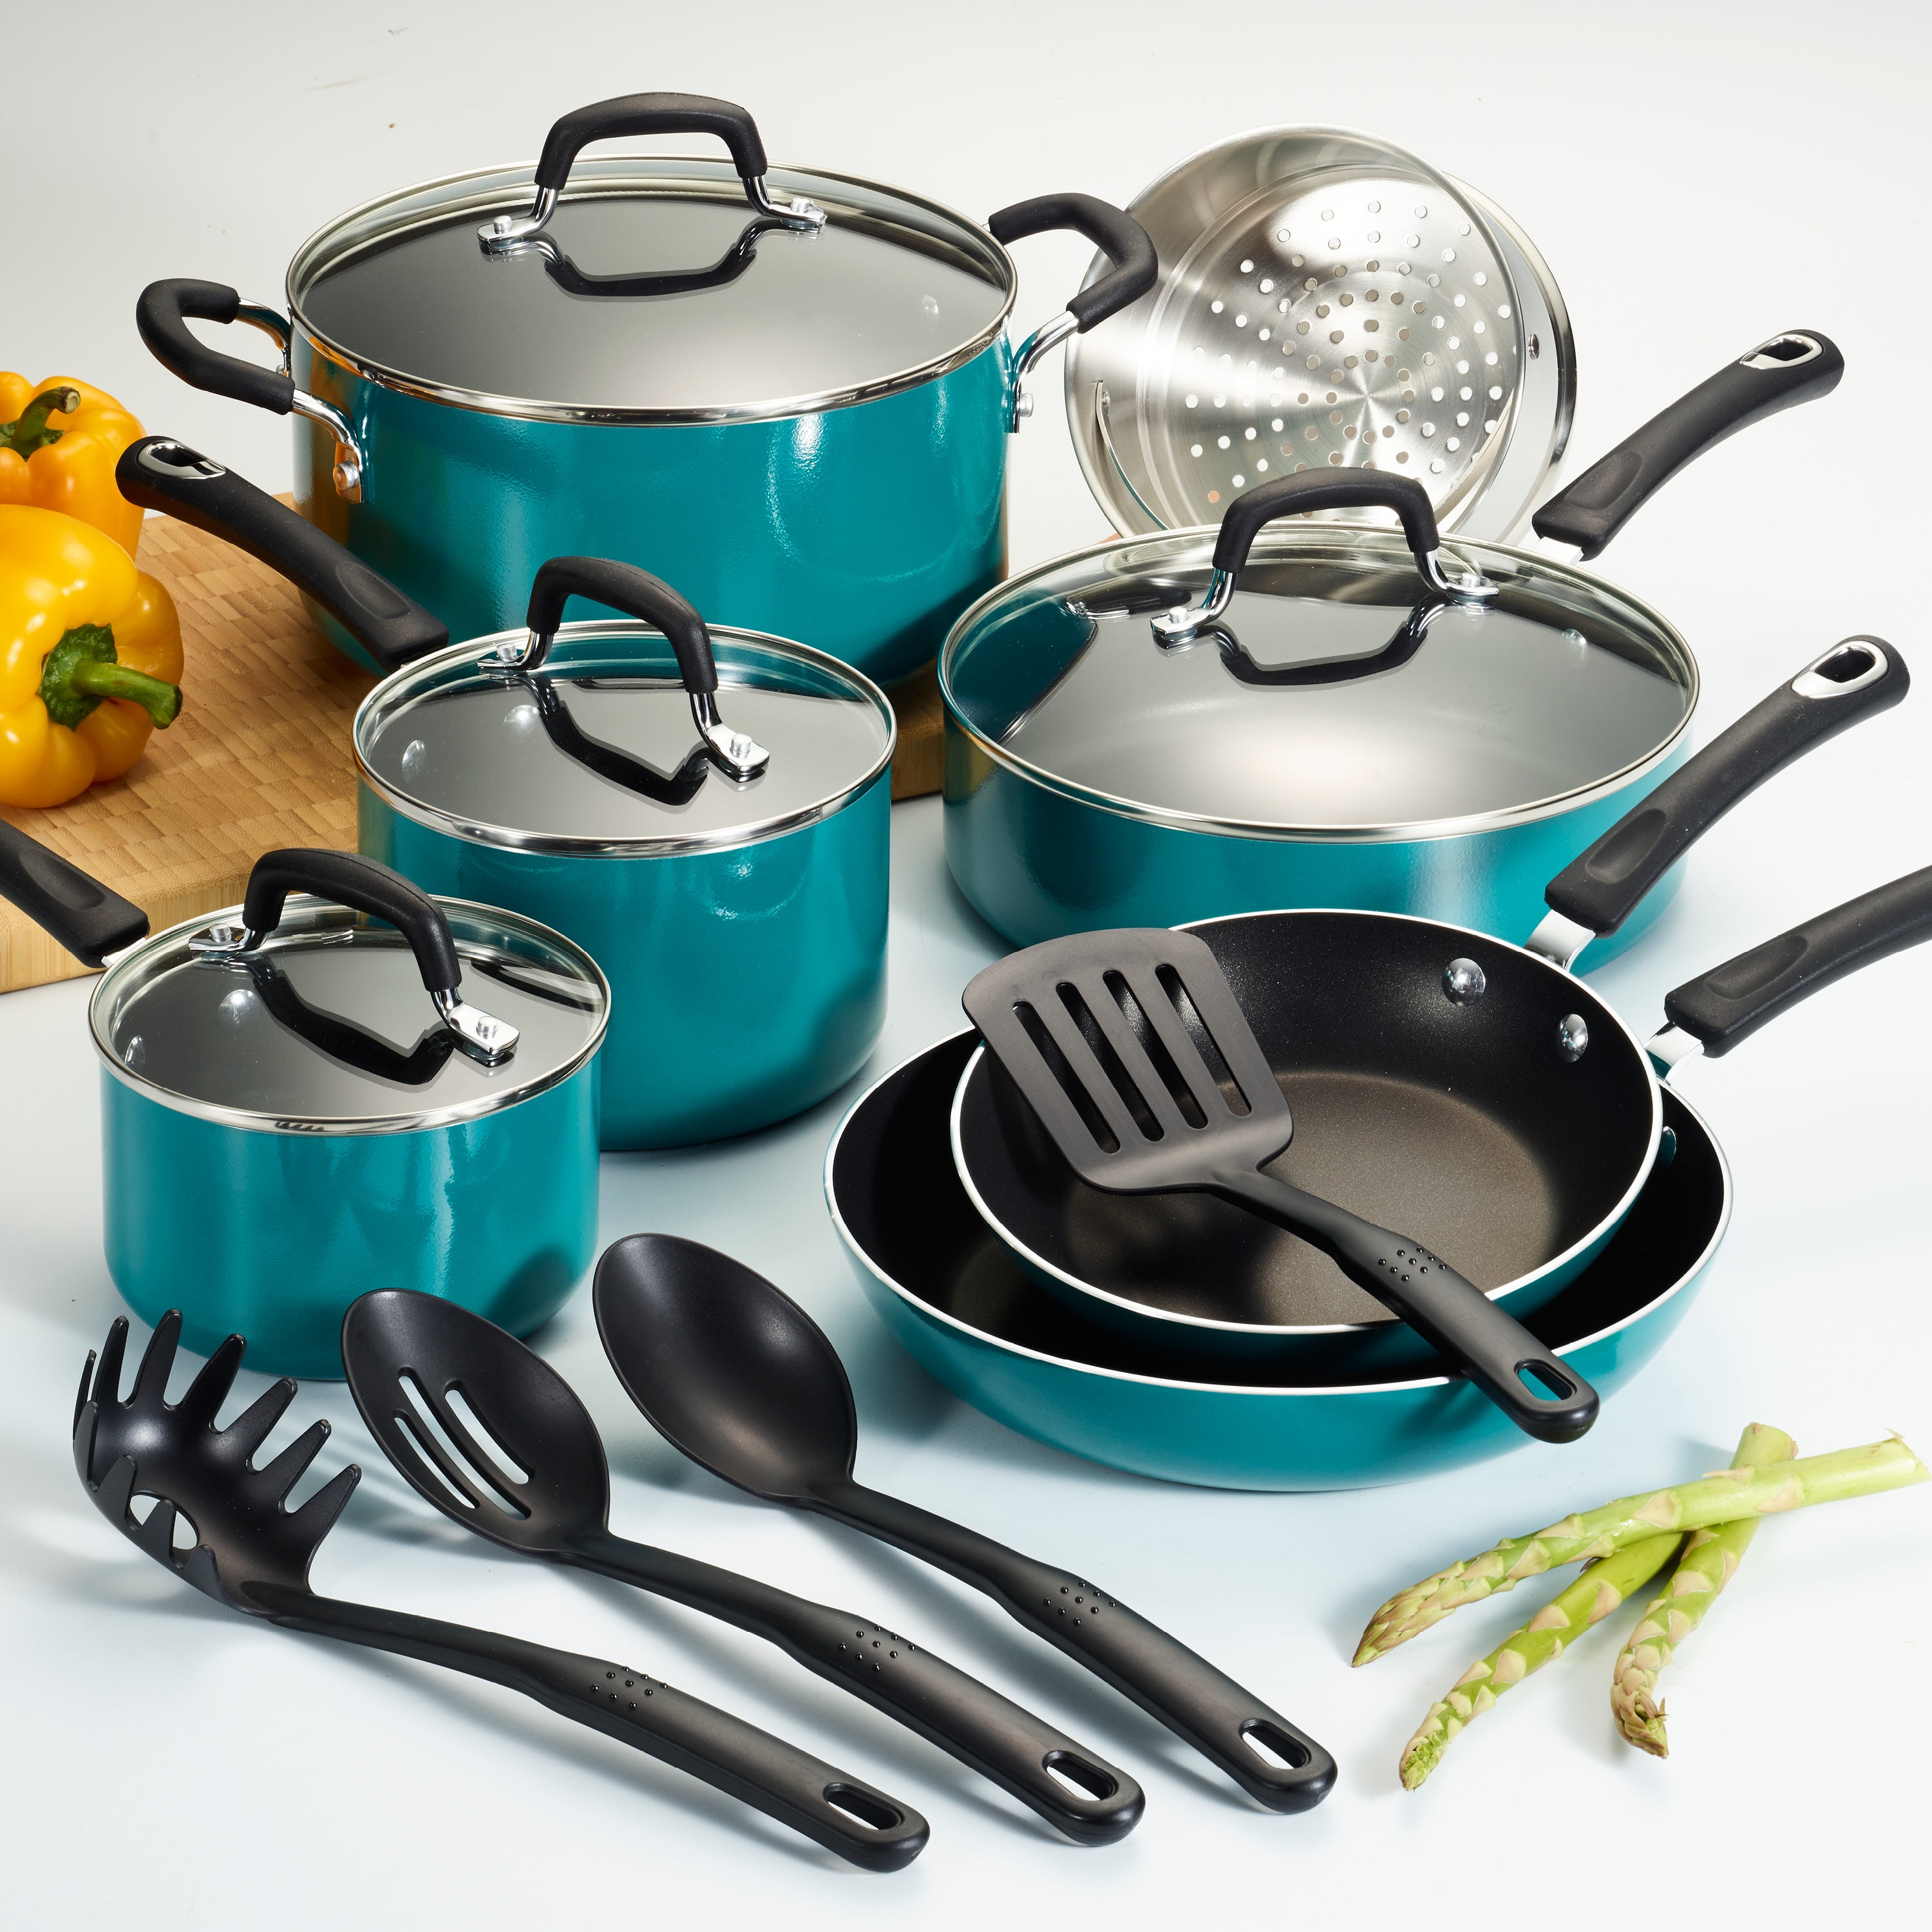 Tramontina Cookware: Excellence in Eco-Friendly Kitchen Tools